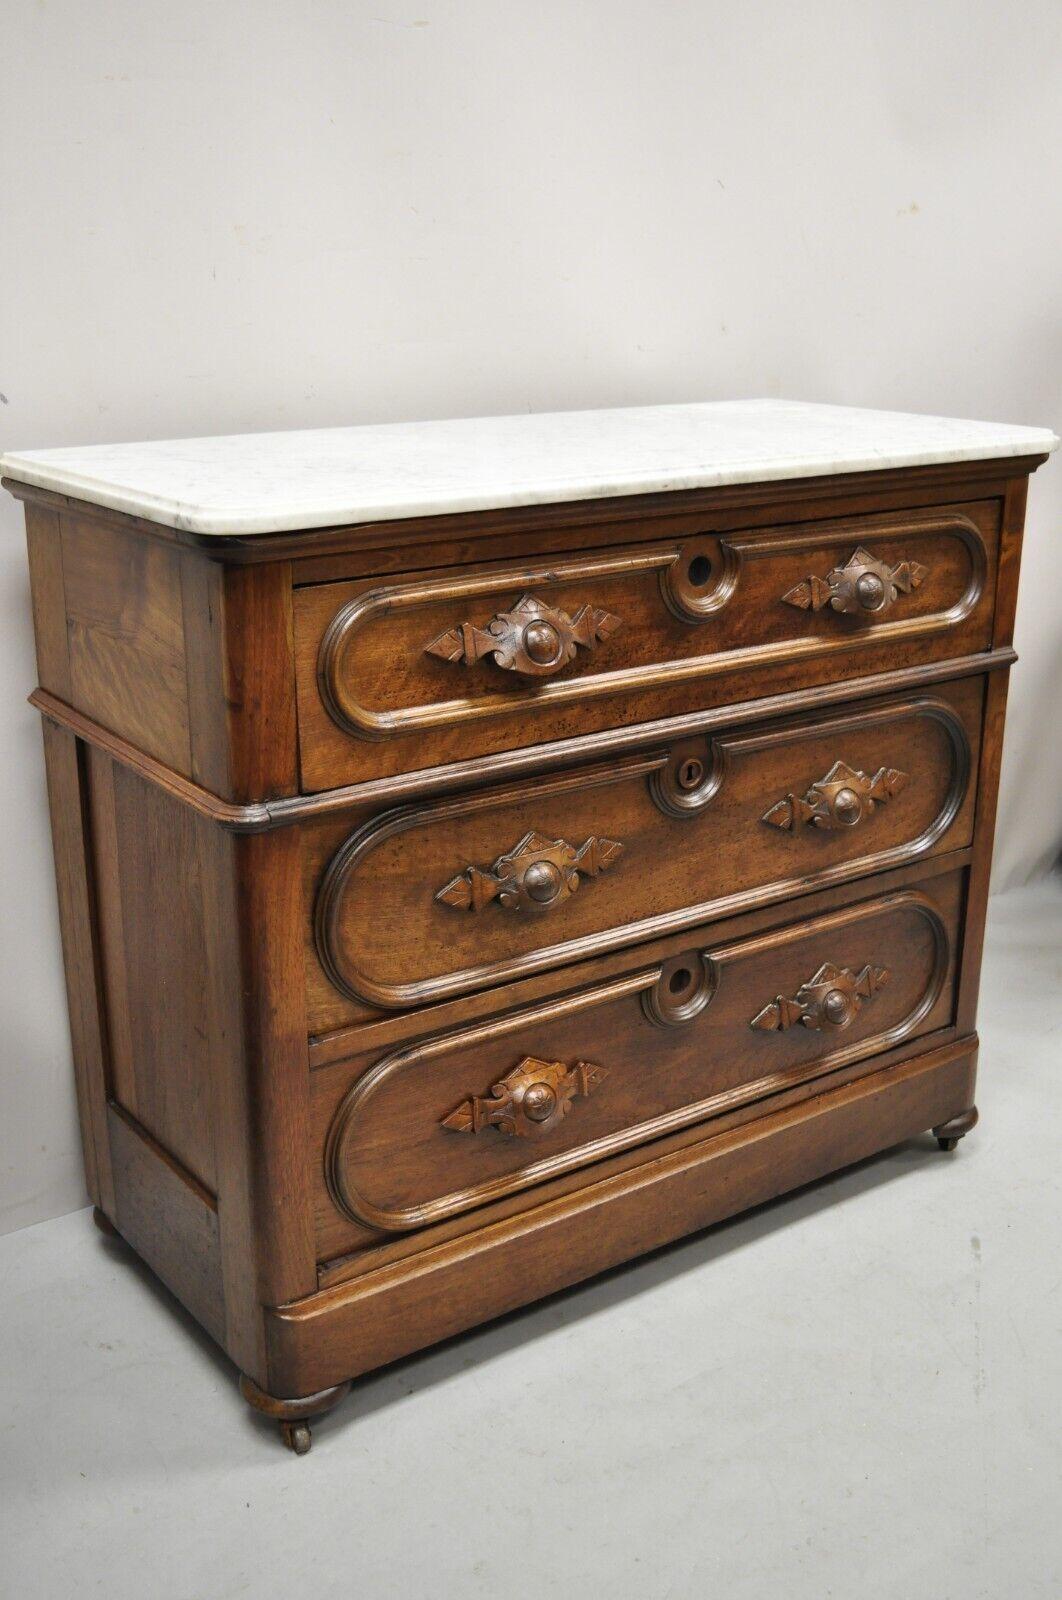 Antique Eastlake Victorian Carved Walnut Marble Top Dresser Chest Washstand. Item features carved wood drawer pulls, rolling casters, marble top, solid wood construction, beautiful wood grain, nicely carved details, no key, but unlocked,3 dovetailed